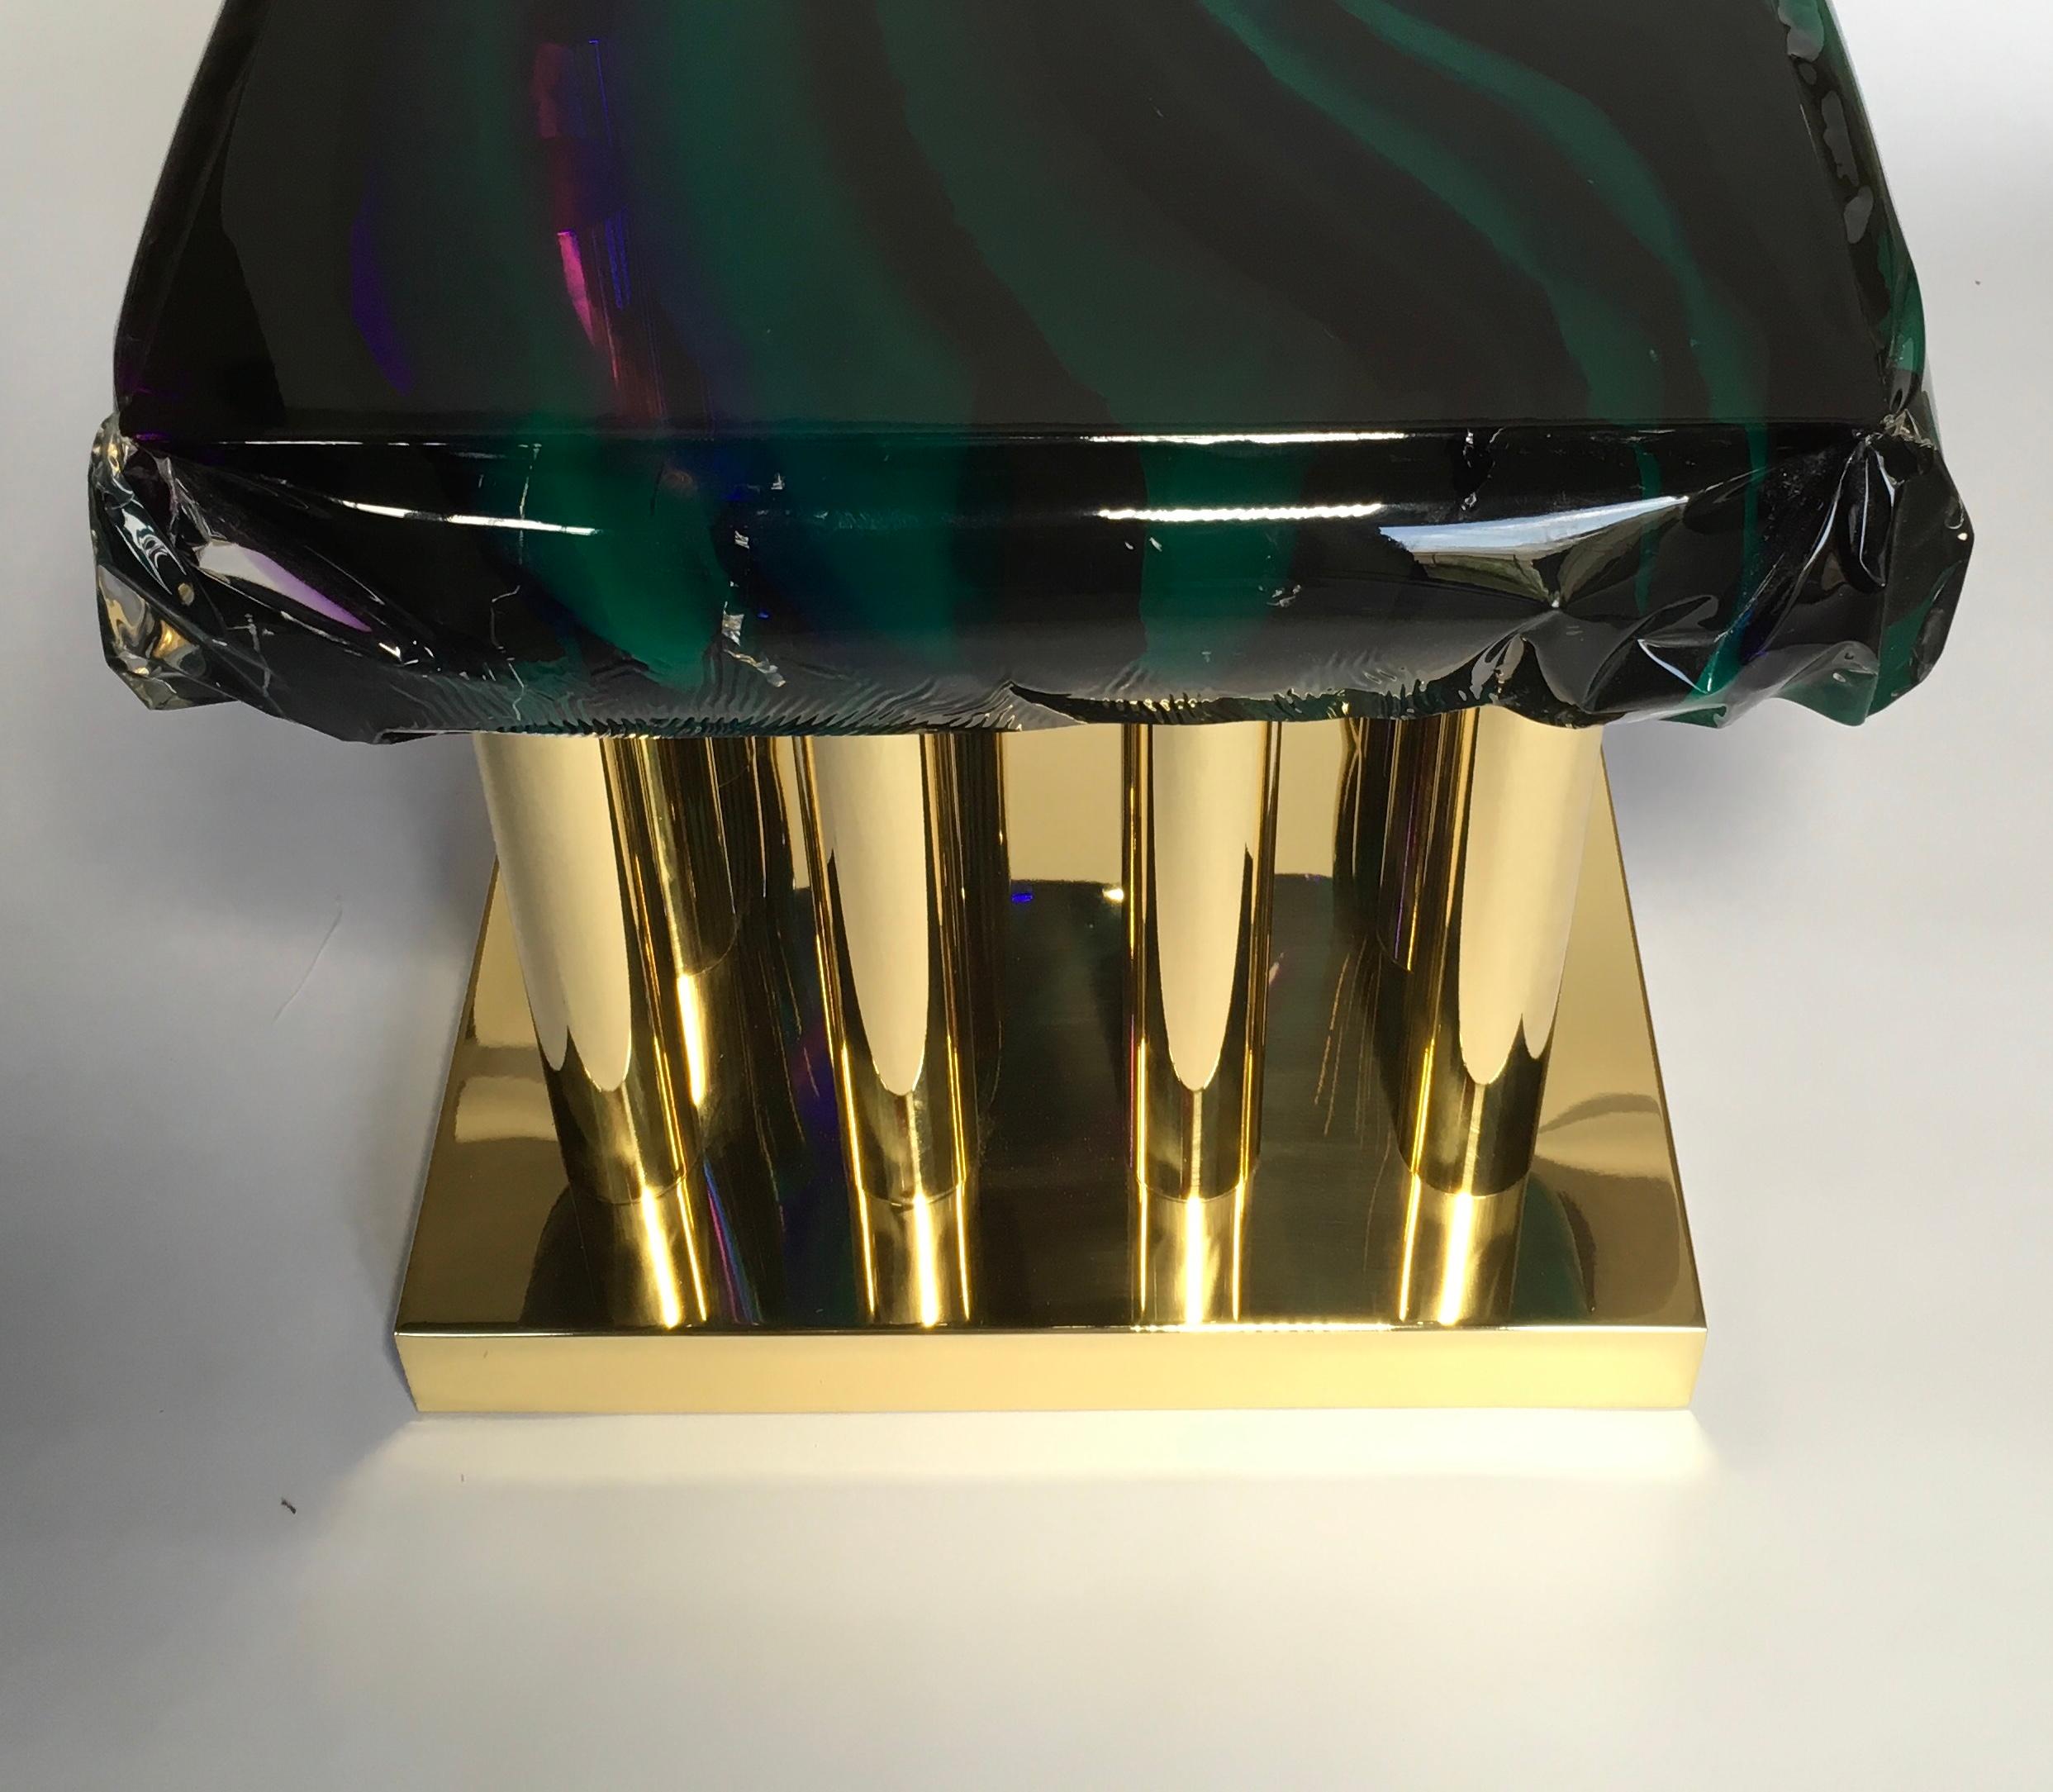 Coffee table in multi-color plexiglass with sixteen brass legs designed by Studio Superego for Superego Editions, in 2018. Unique piece.

Superego editions was born in 2006, performing a constant activity of research in decorative arts by offering